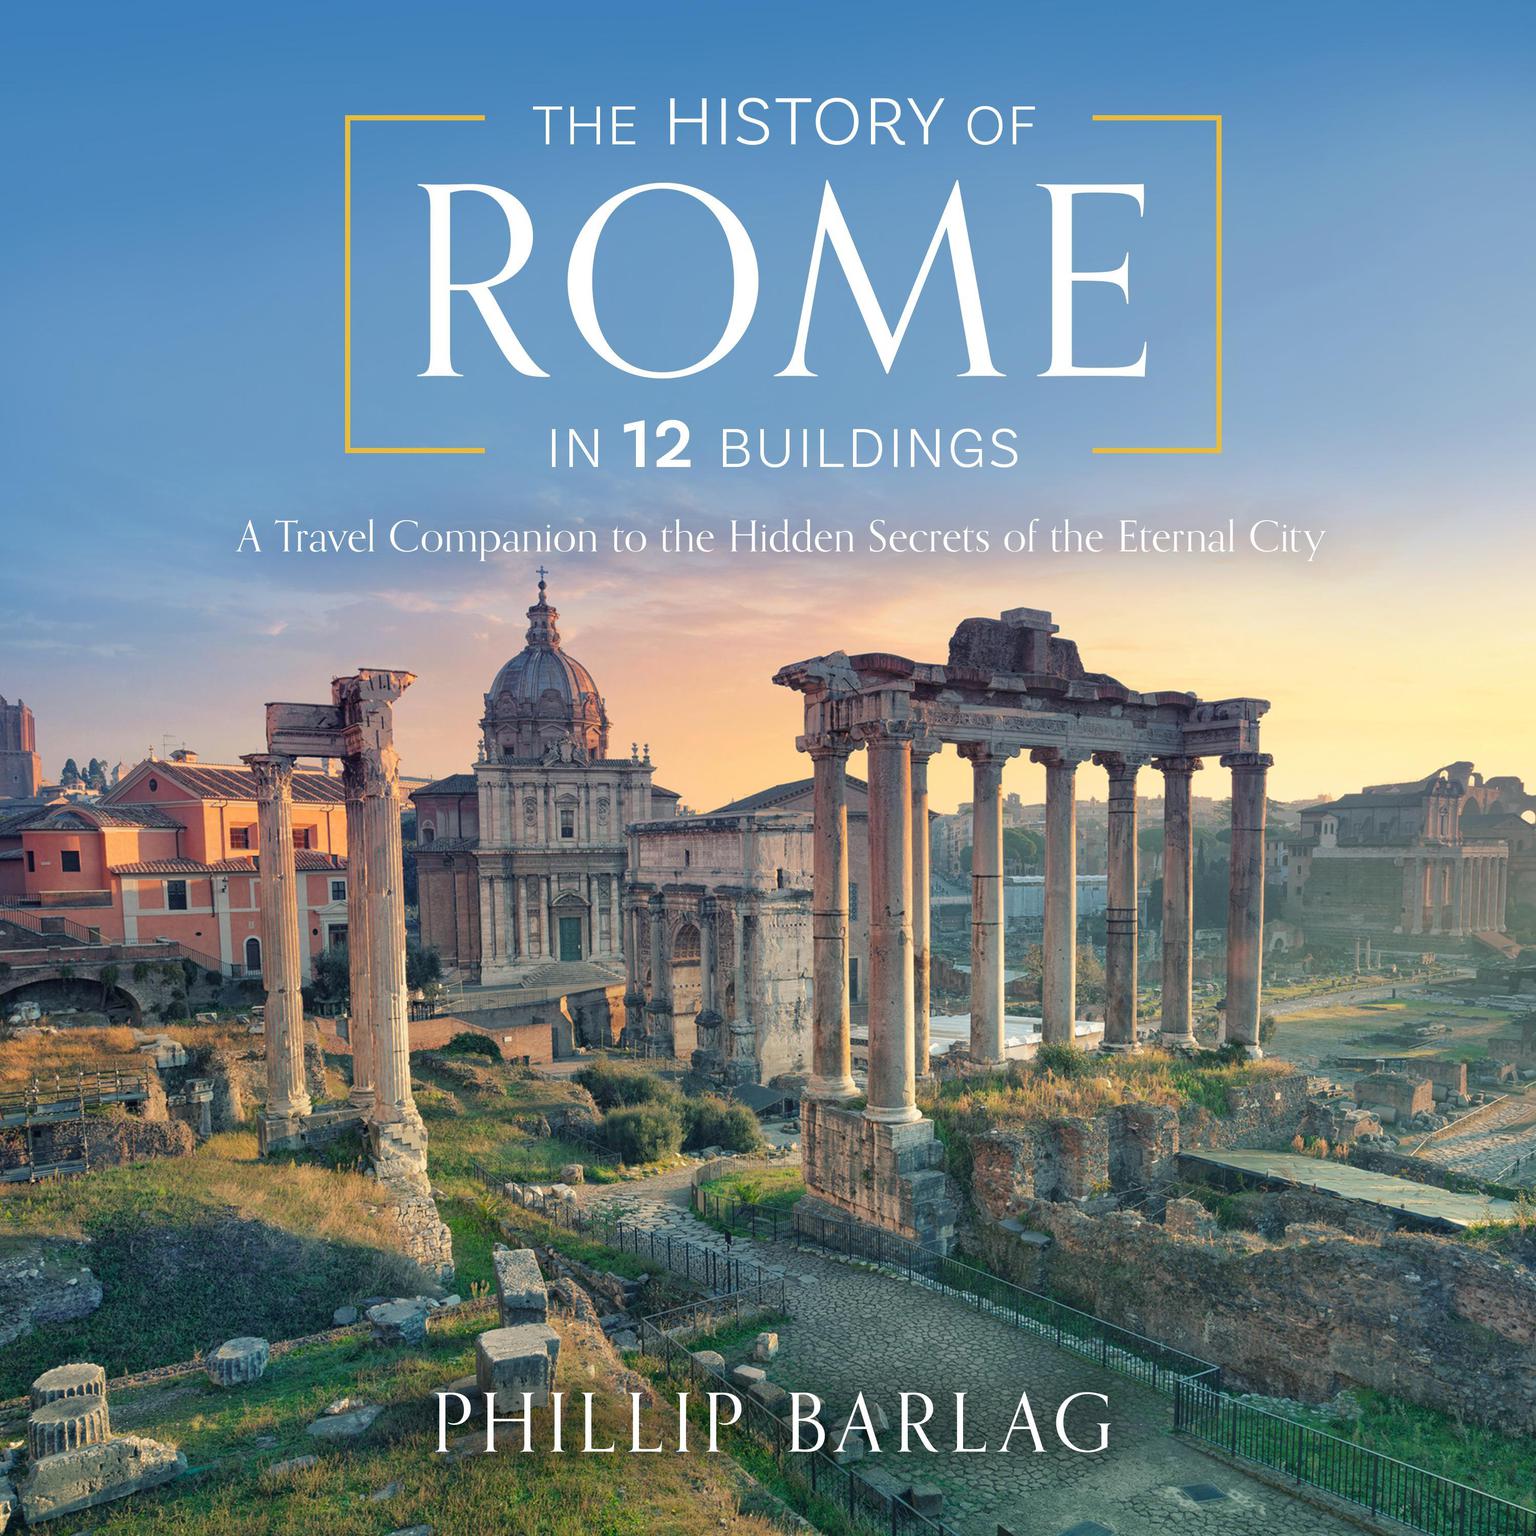 The History of Rome in 12 Buildings: A Travel Companion to the Hidden Secrets of The Eternal City Audiobook, by Phillip Barlag